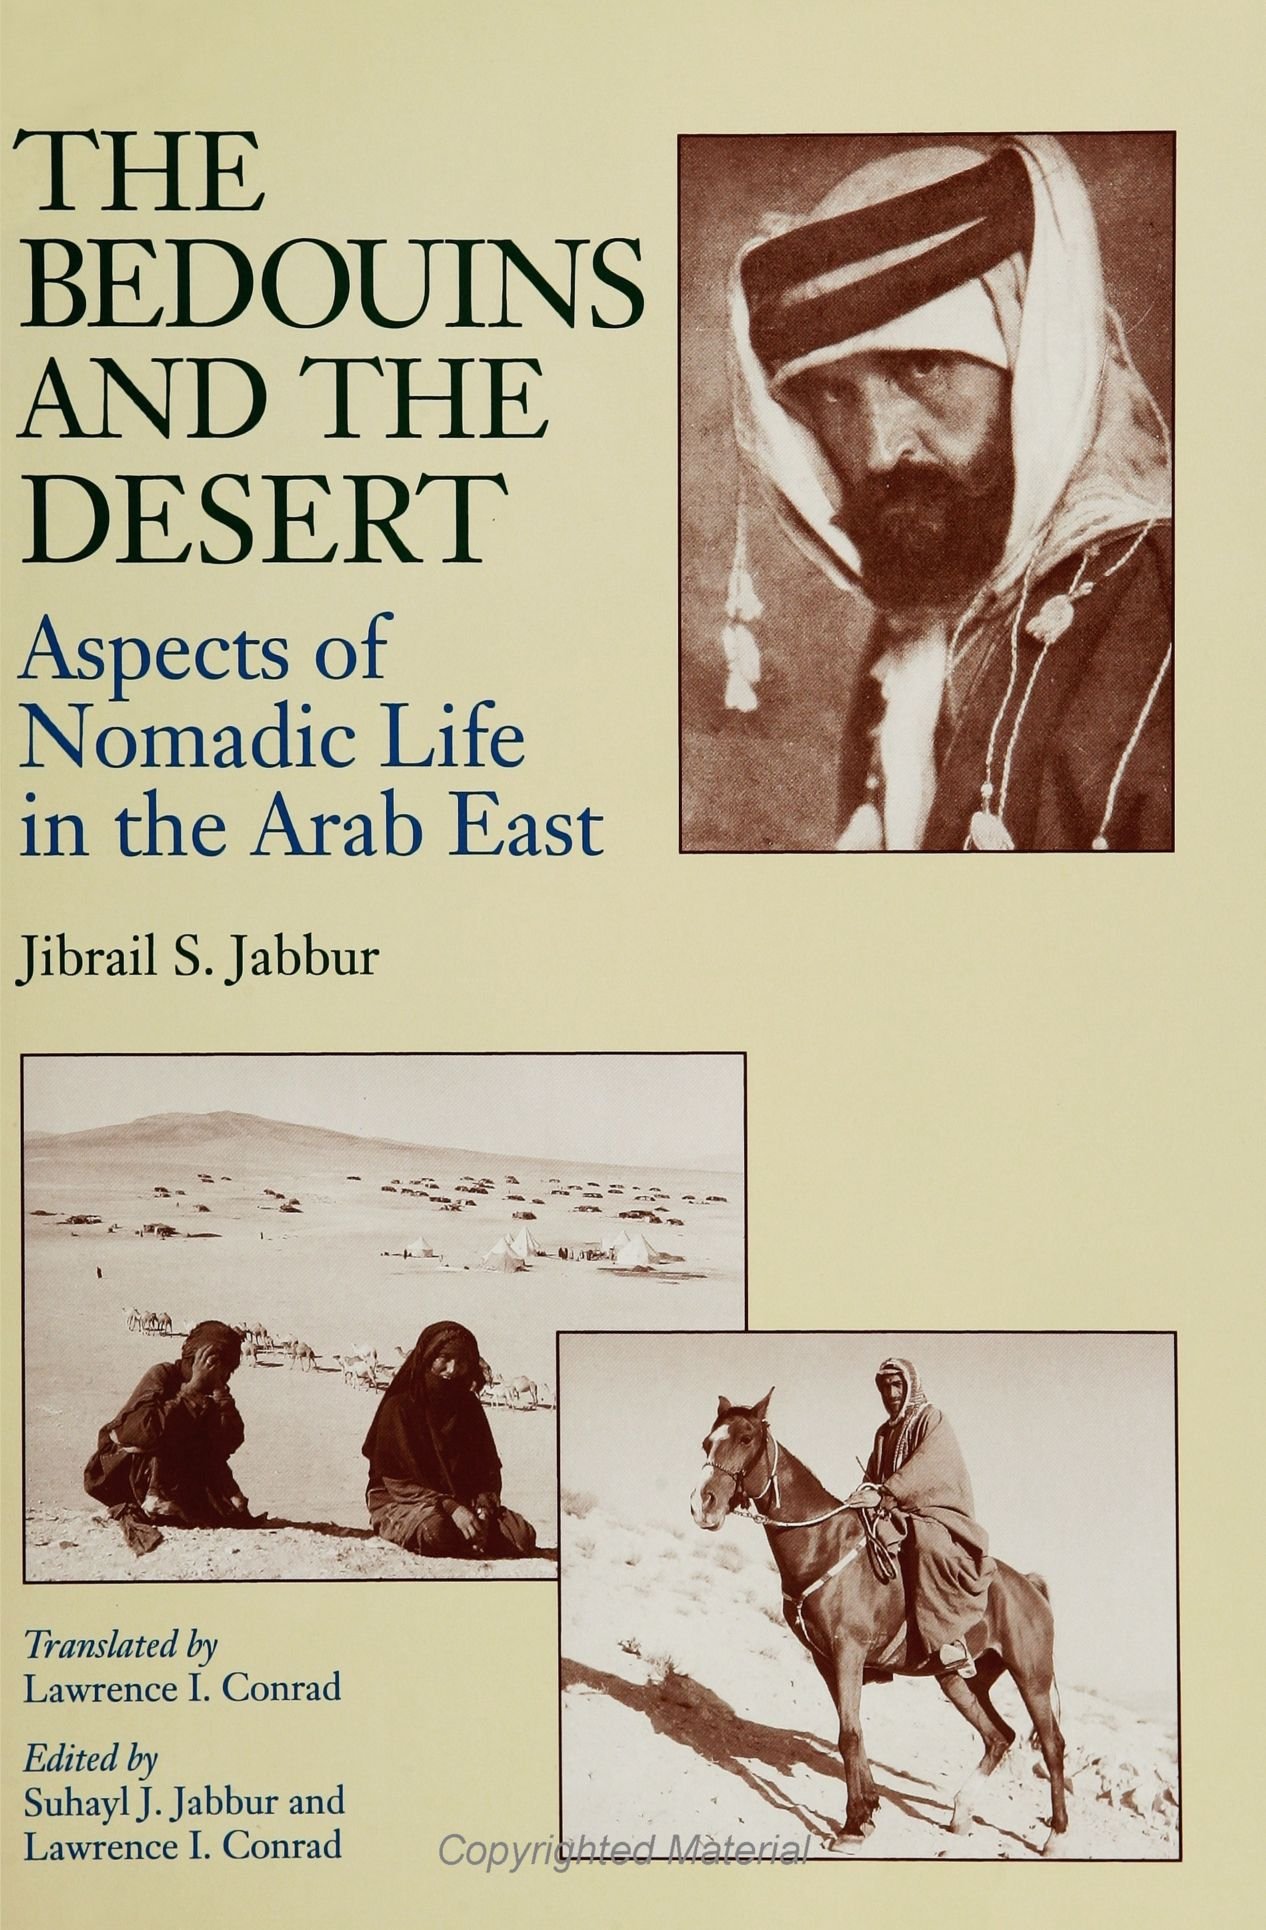 Bedouins and the Desert, The: Aspects of Nomadic Life in the Arab East